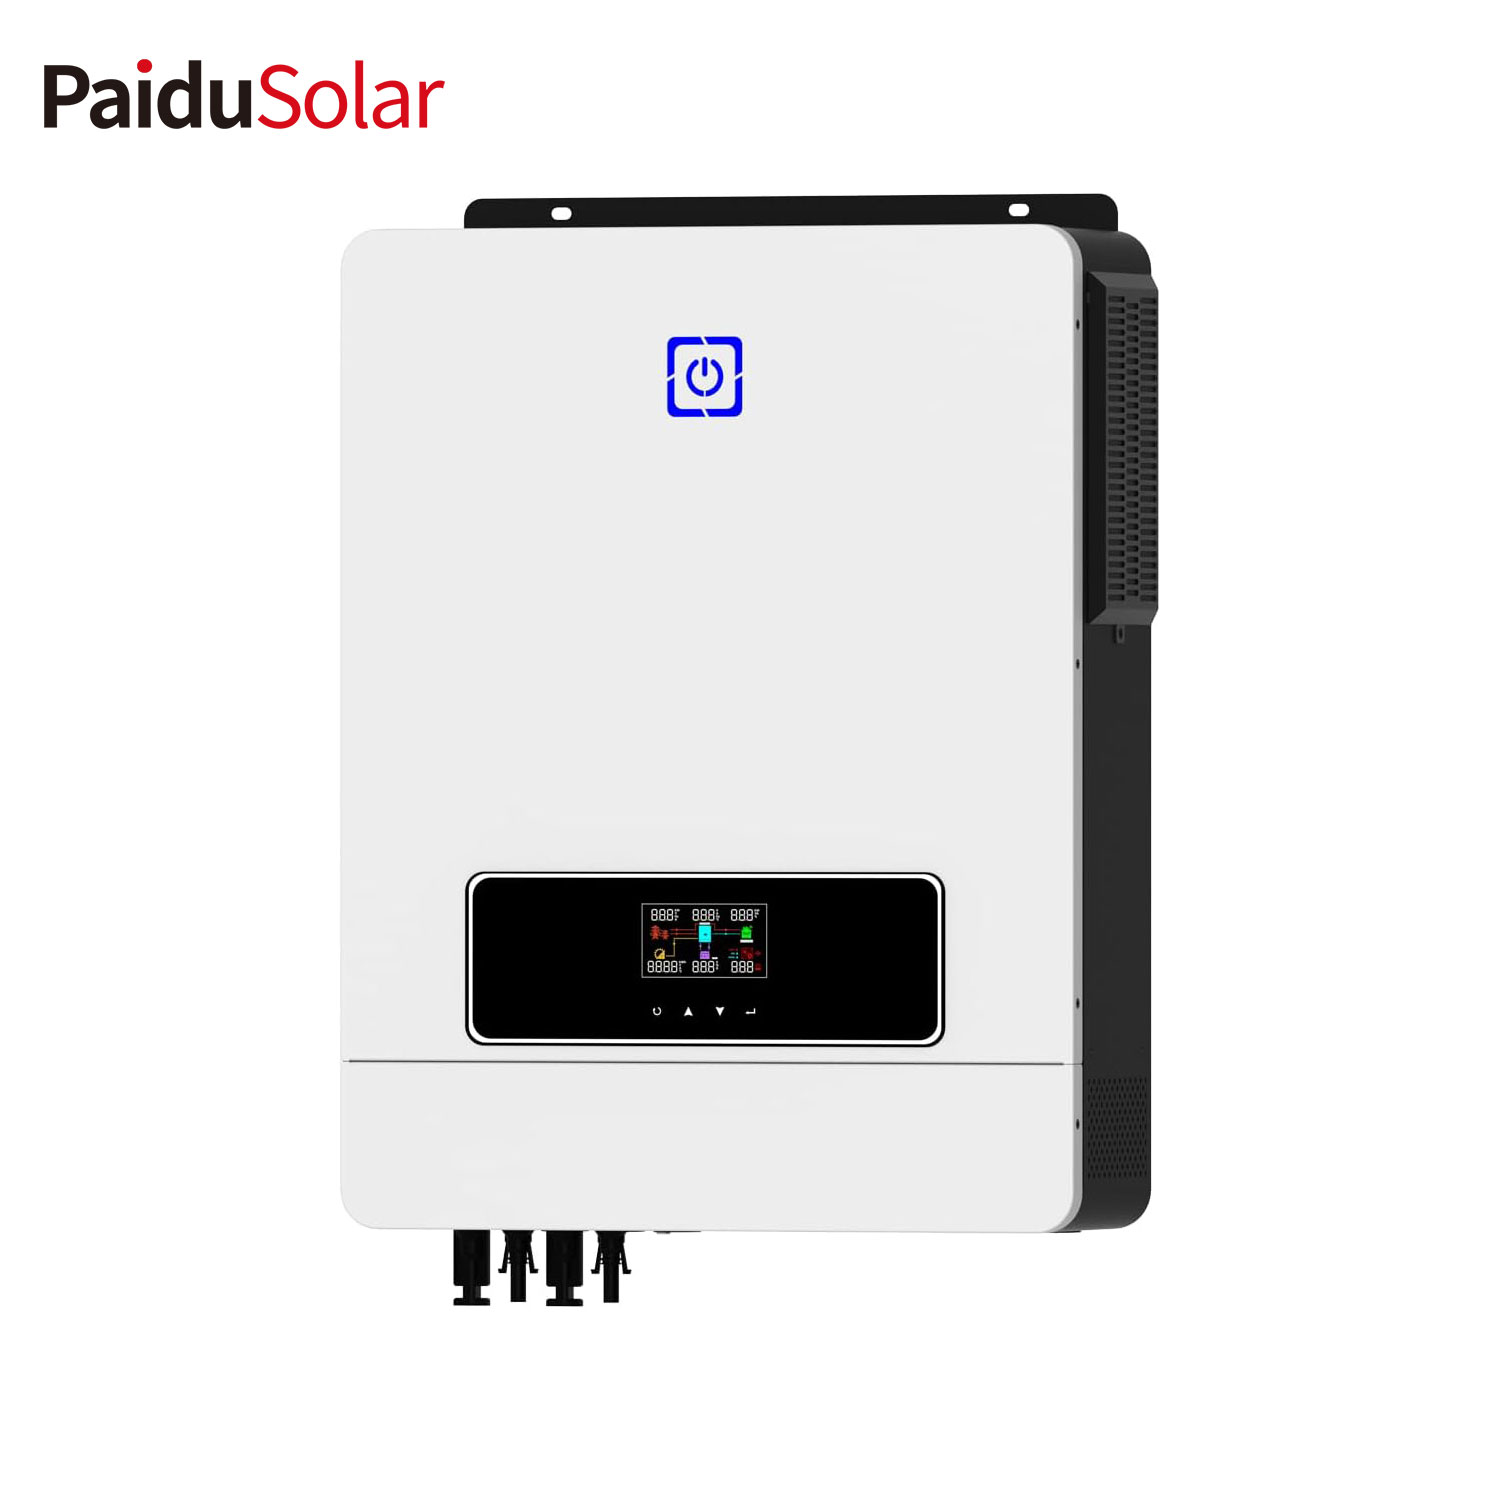 PaiduSolar 8.2KW Solar Hybrid Inverter Built-in Charge Controller And Pure Sine Wave Inverter For Home Energy Storage